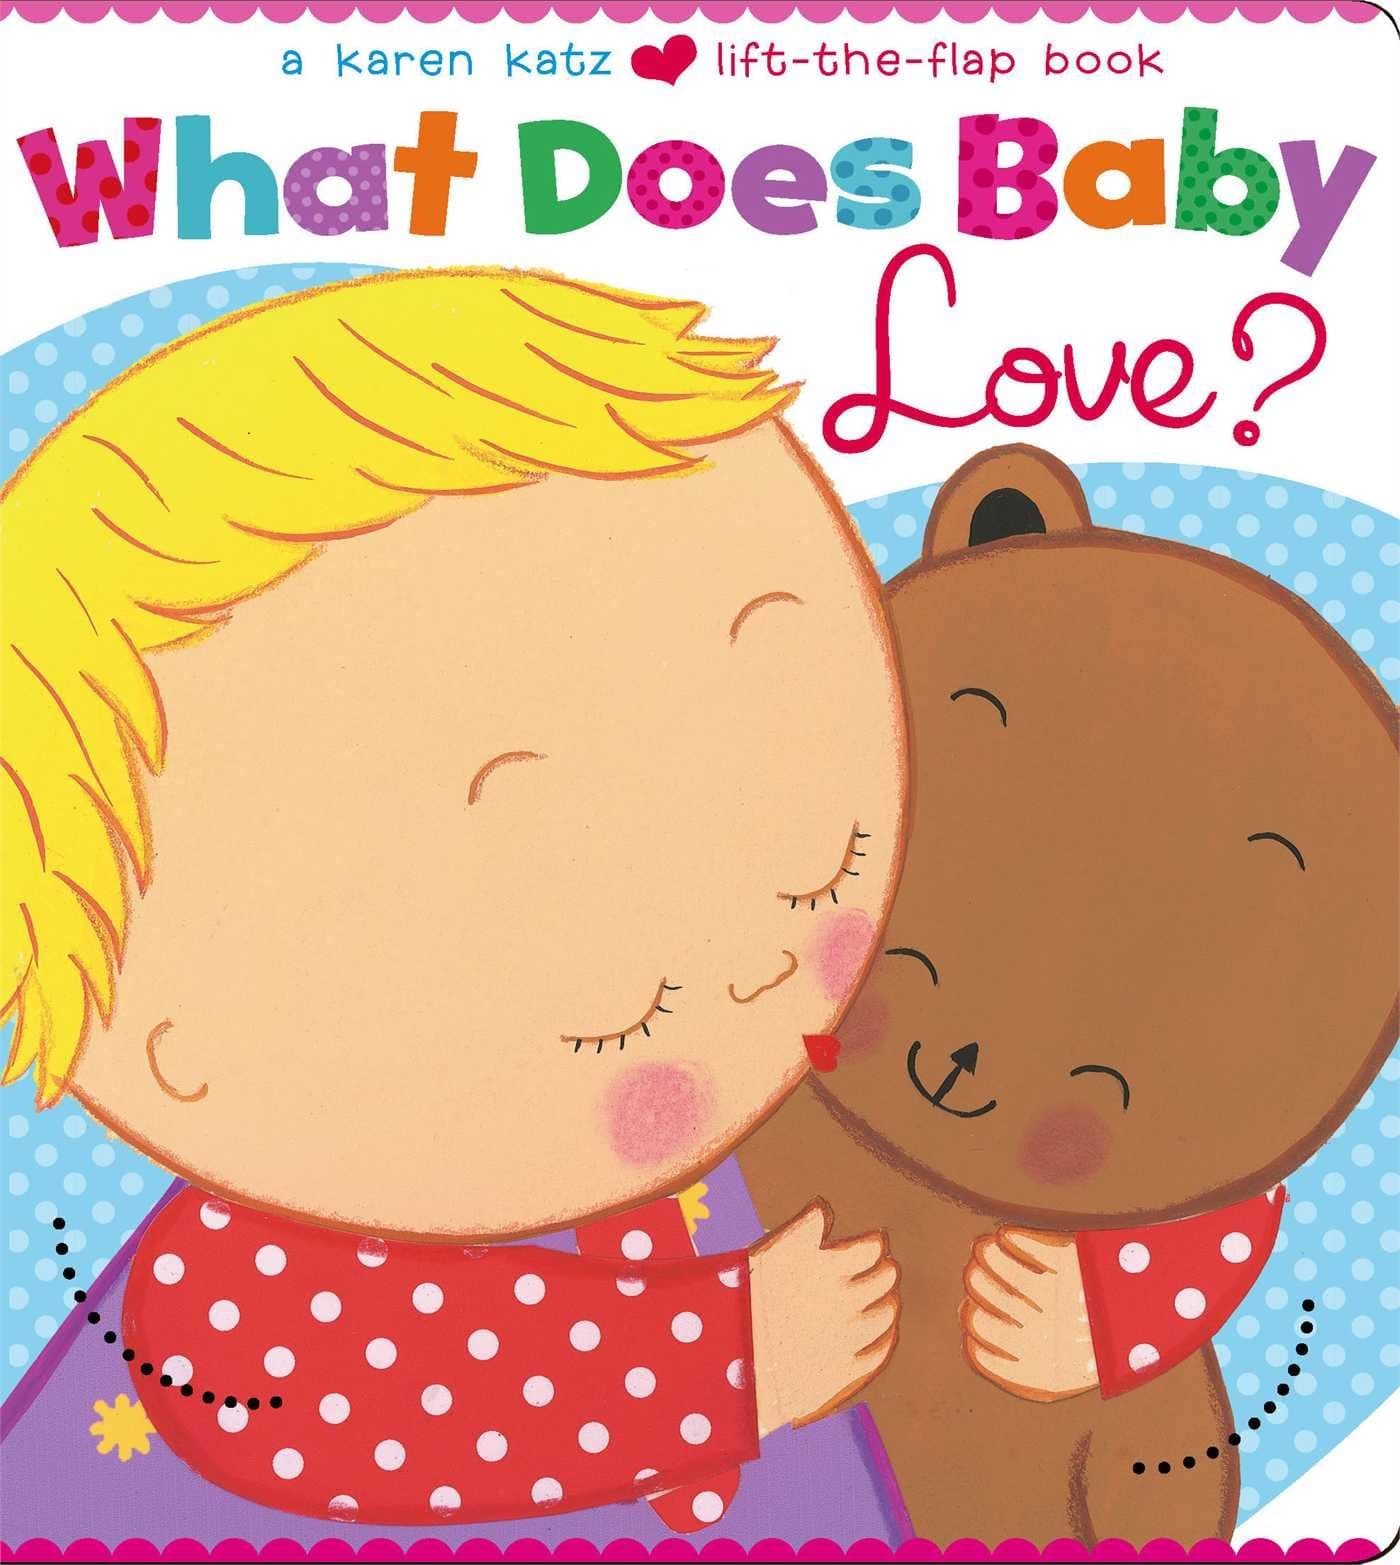 IMG : What does Baby Love?